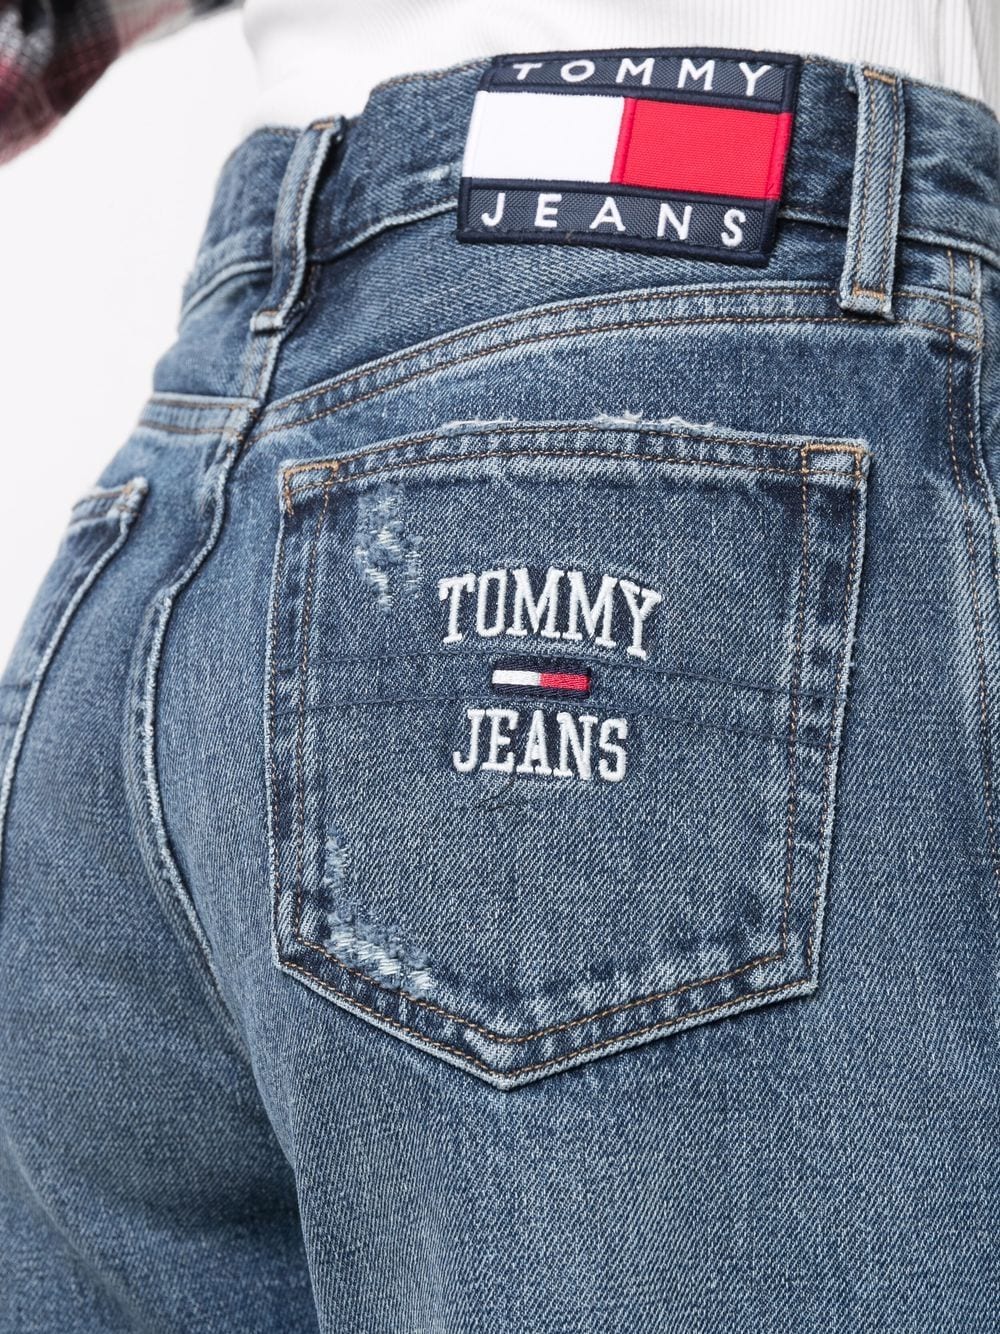 Tommy Jeans - Jeans embroidered-logo Farfetch Detail